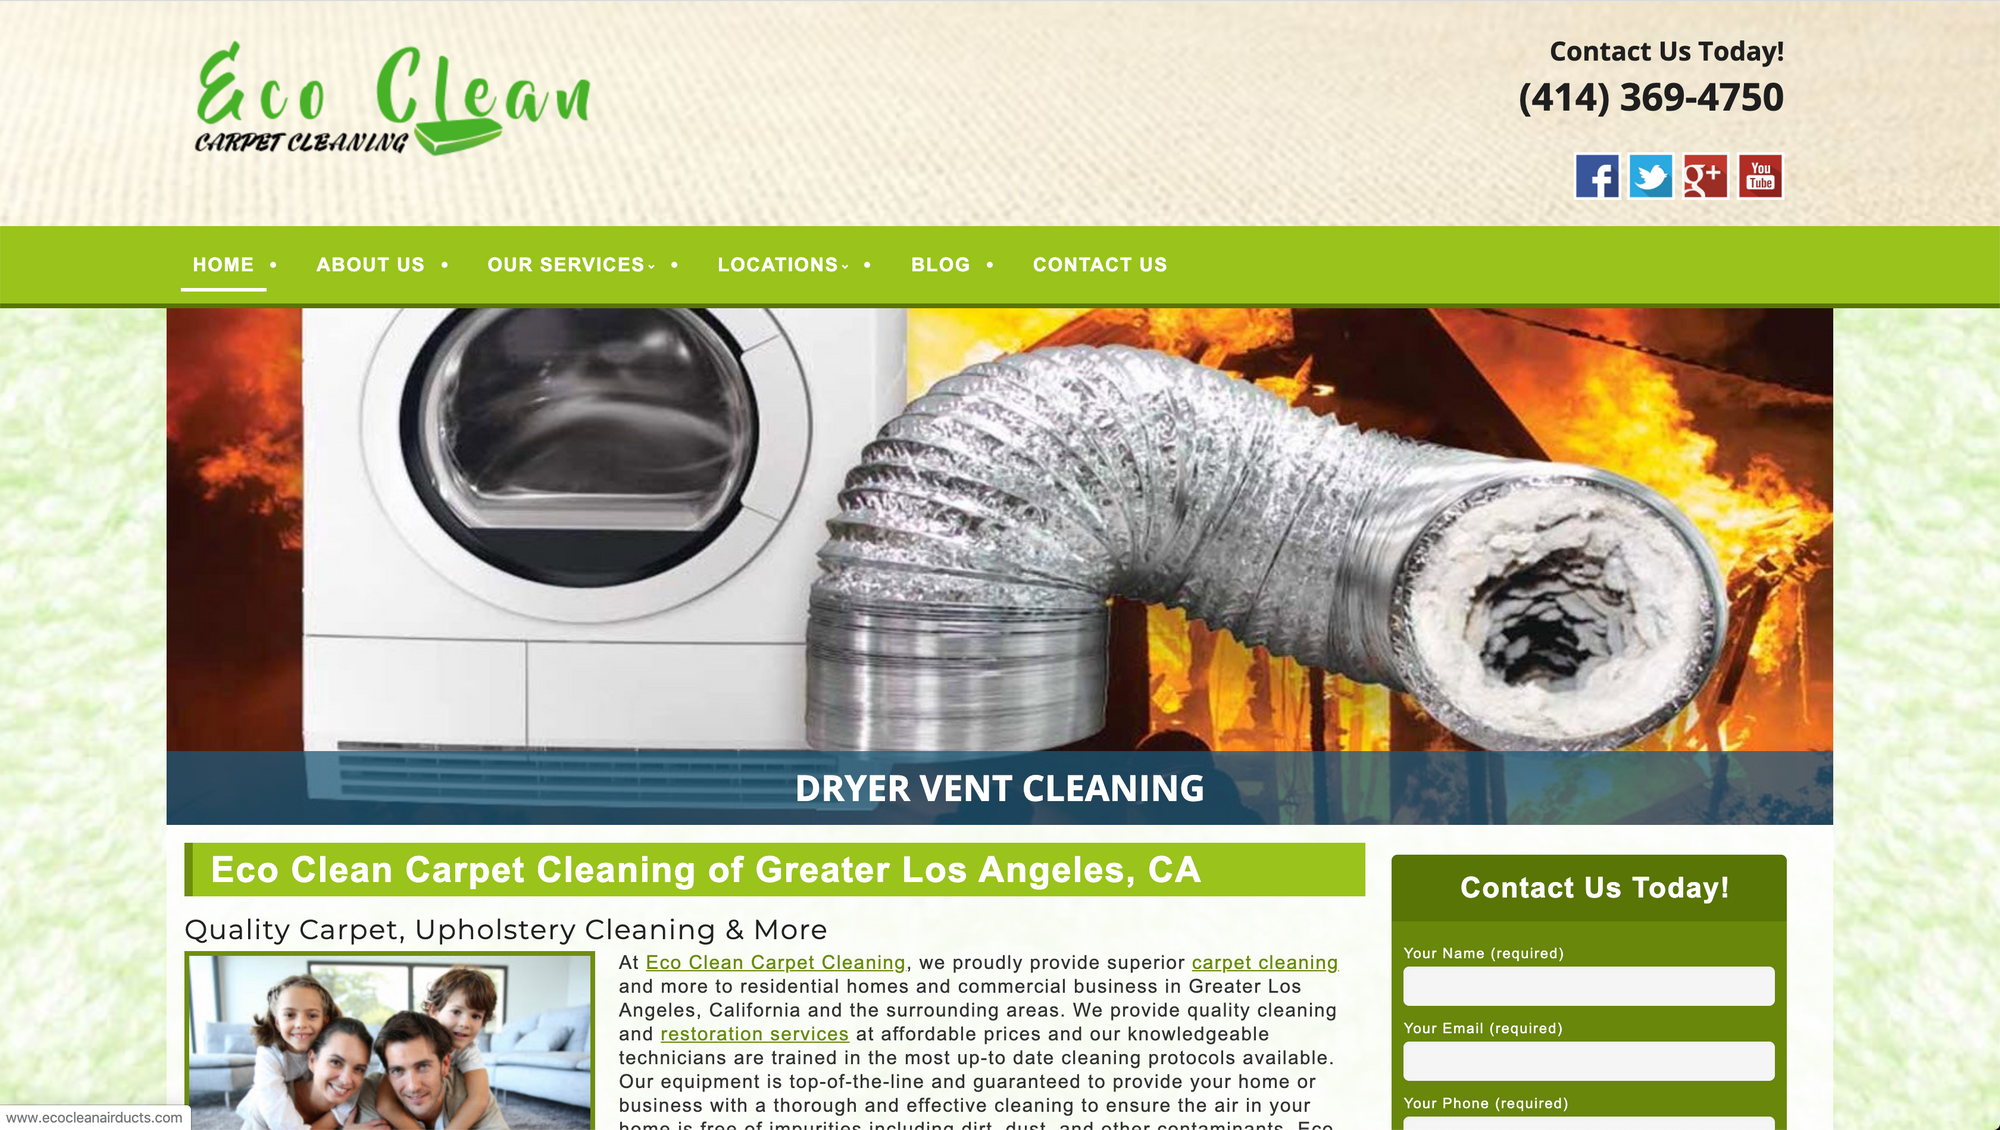 Eco Clean Air Ducts